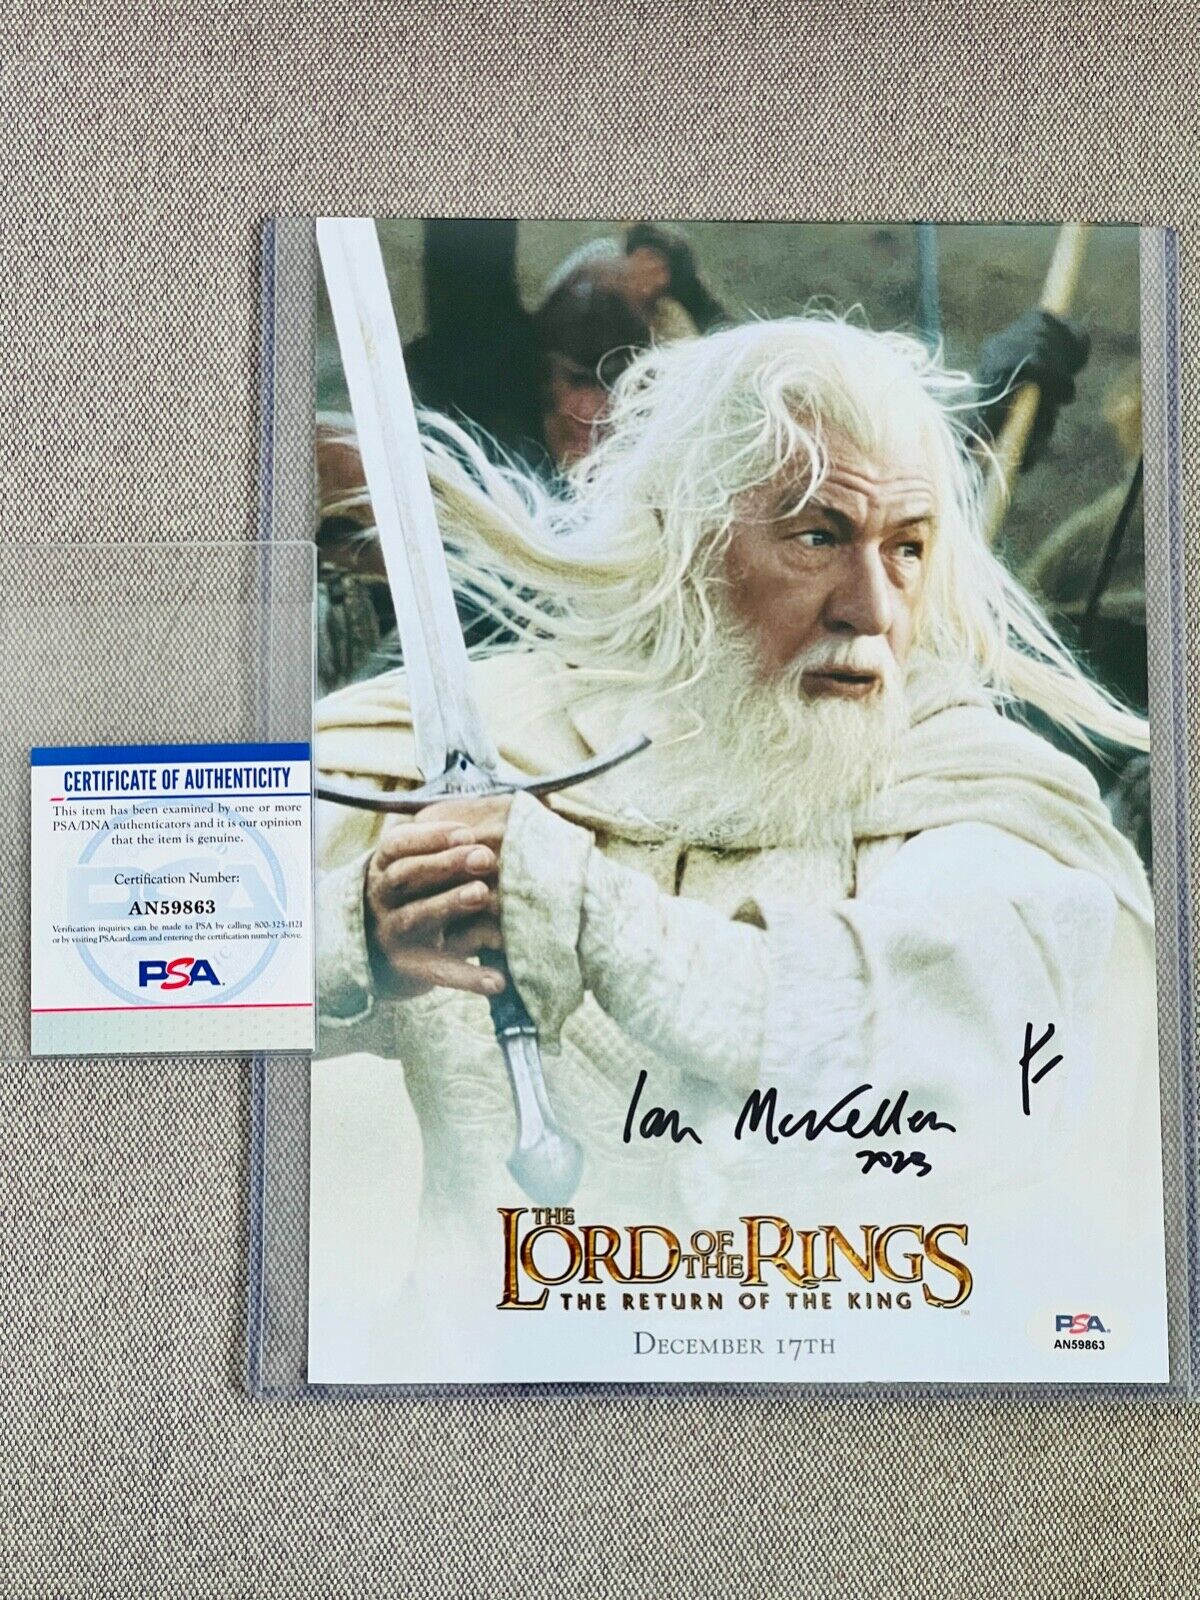 IAN MCKELLEN Signed Photo Gandalf PSA DNA Lord Of The Rings autograph Rare